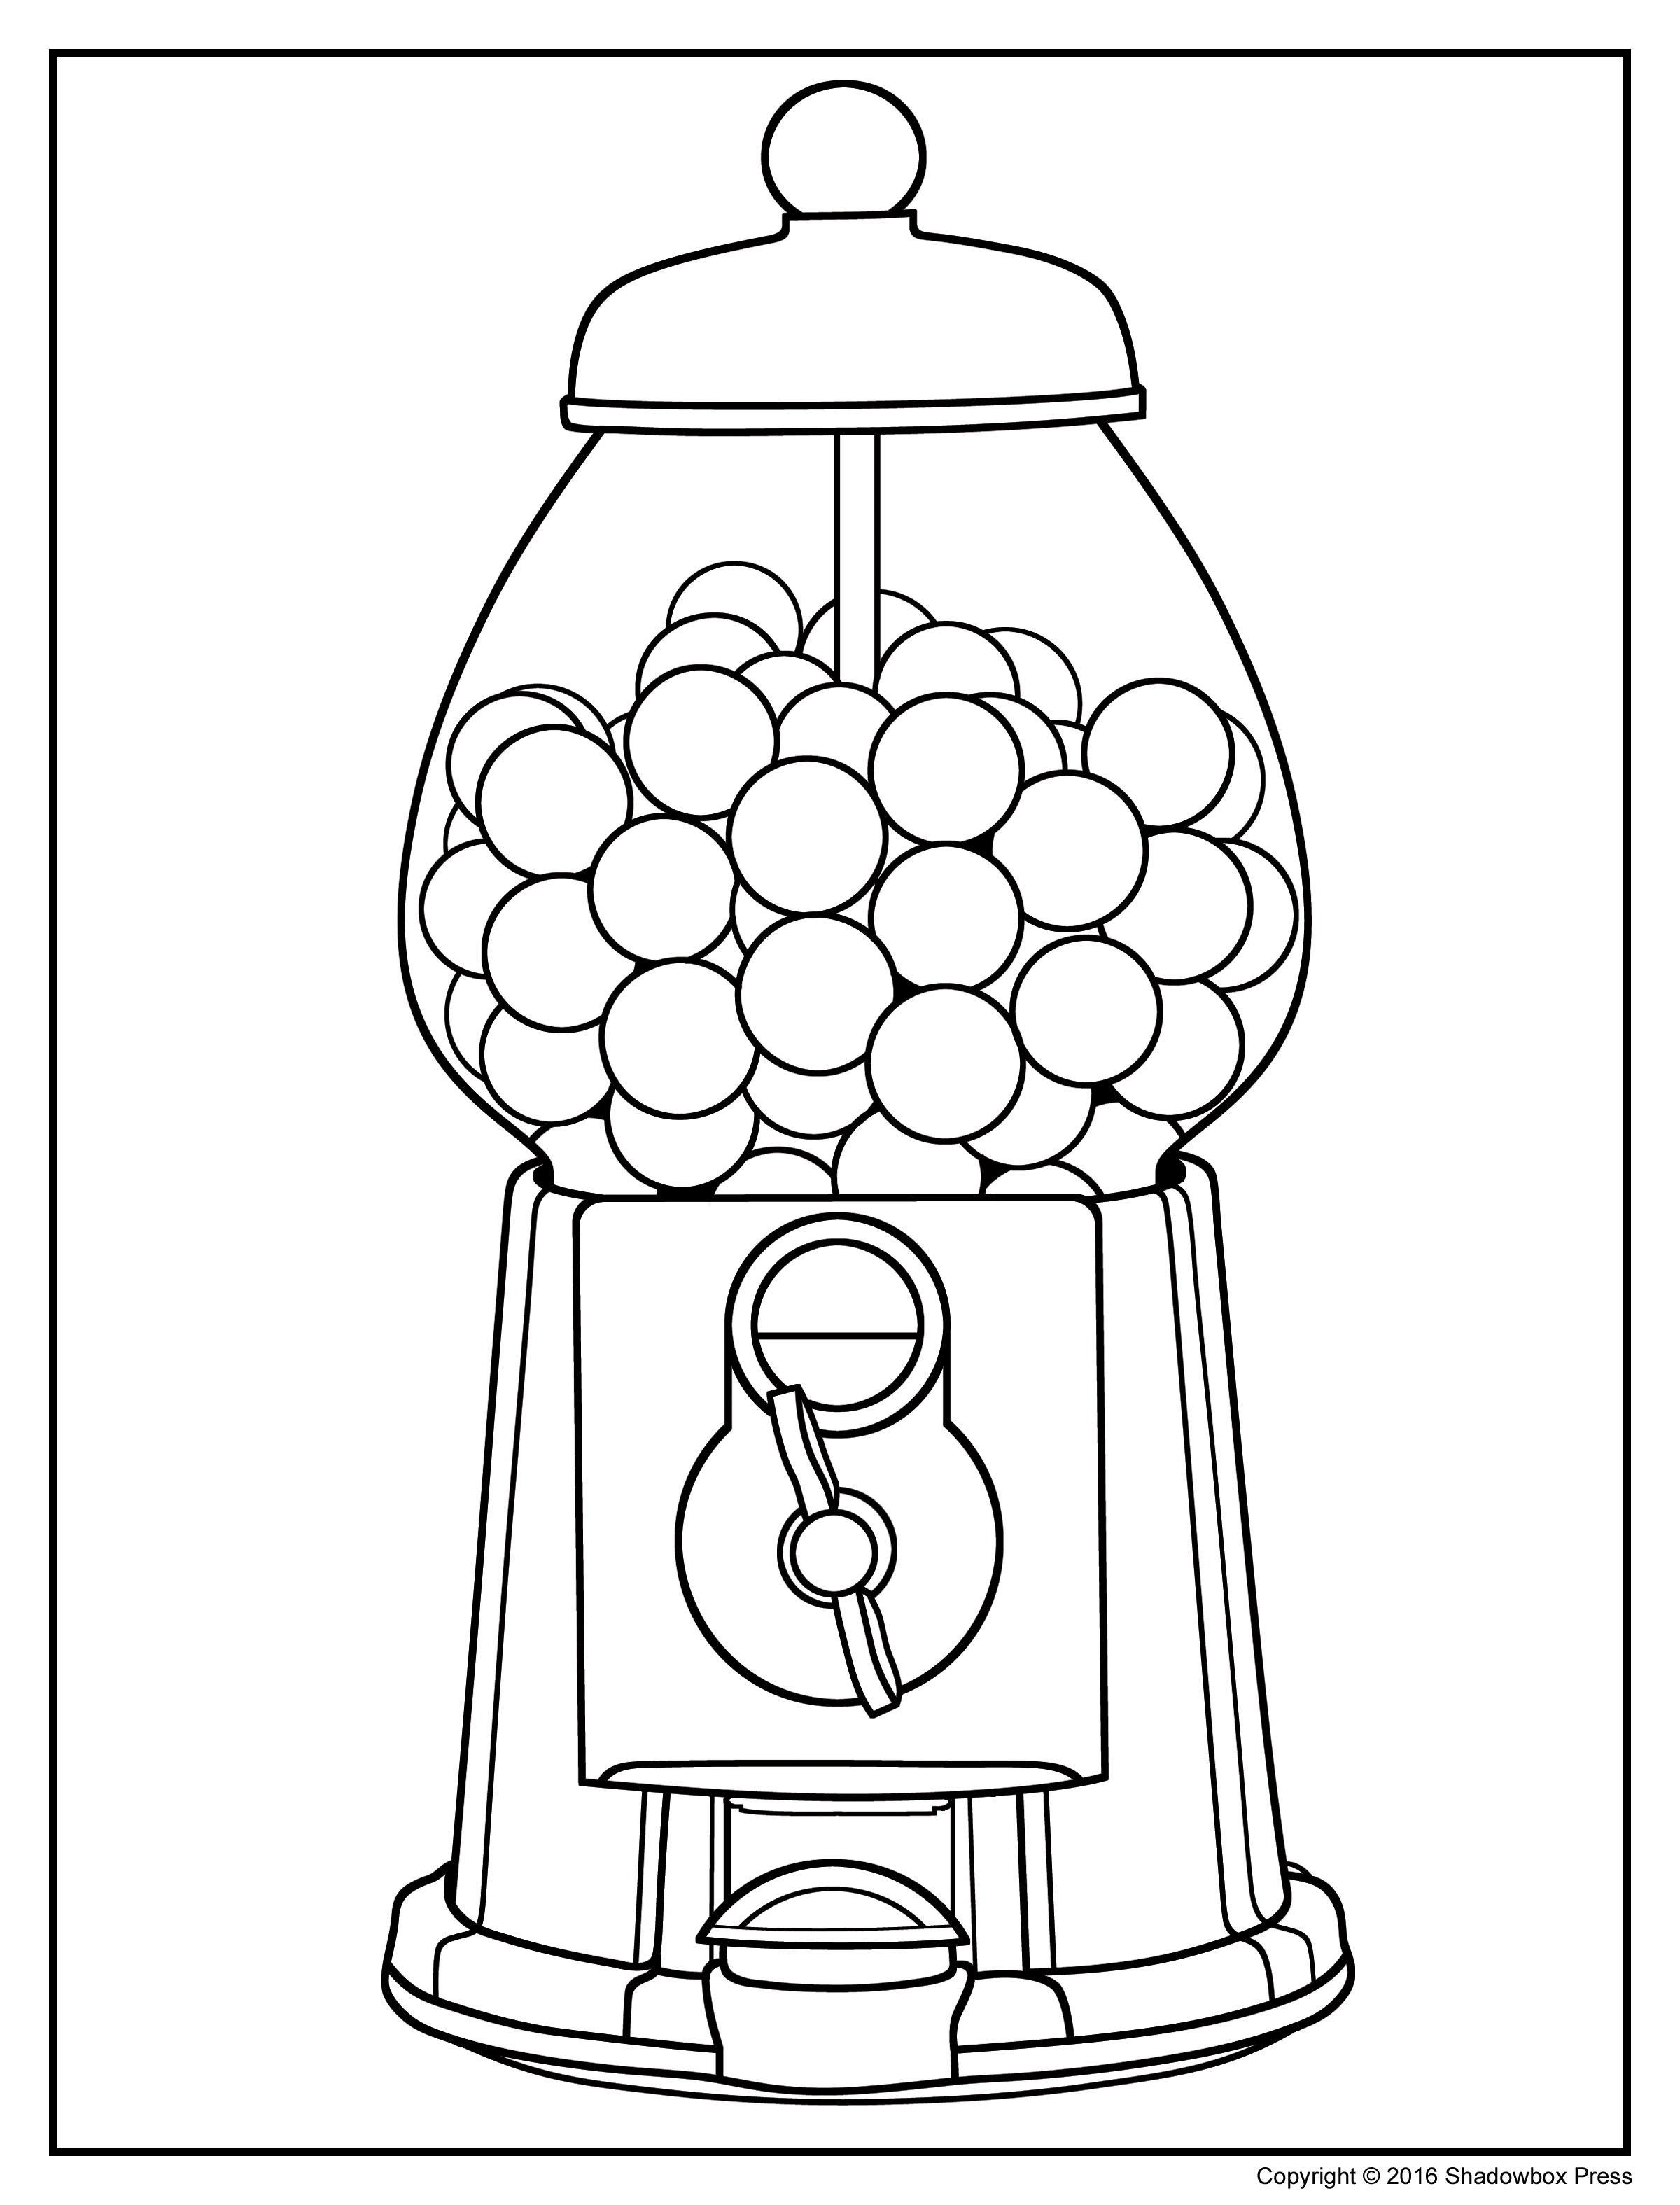 Bubble Gum Coloring Page at GetColorings.com | Free printable colorings